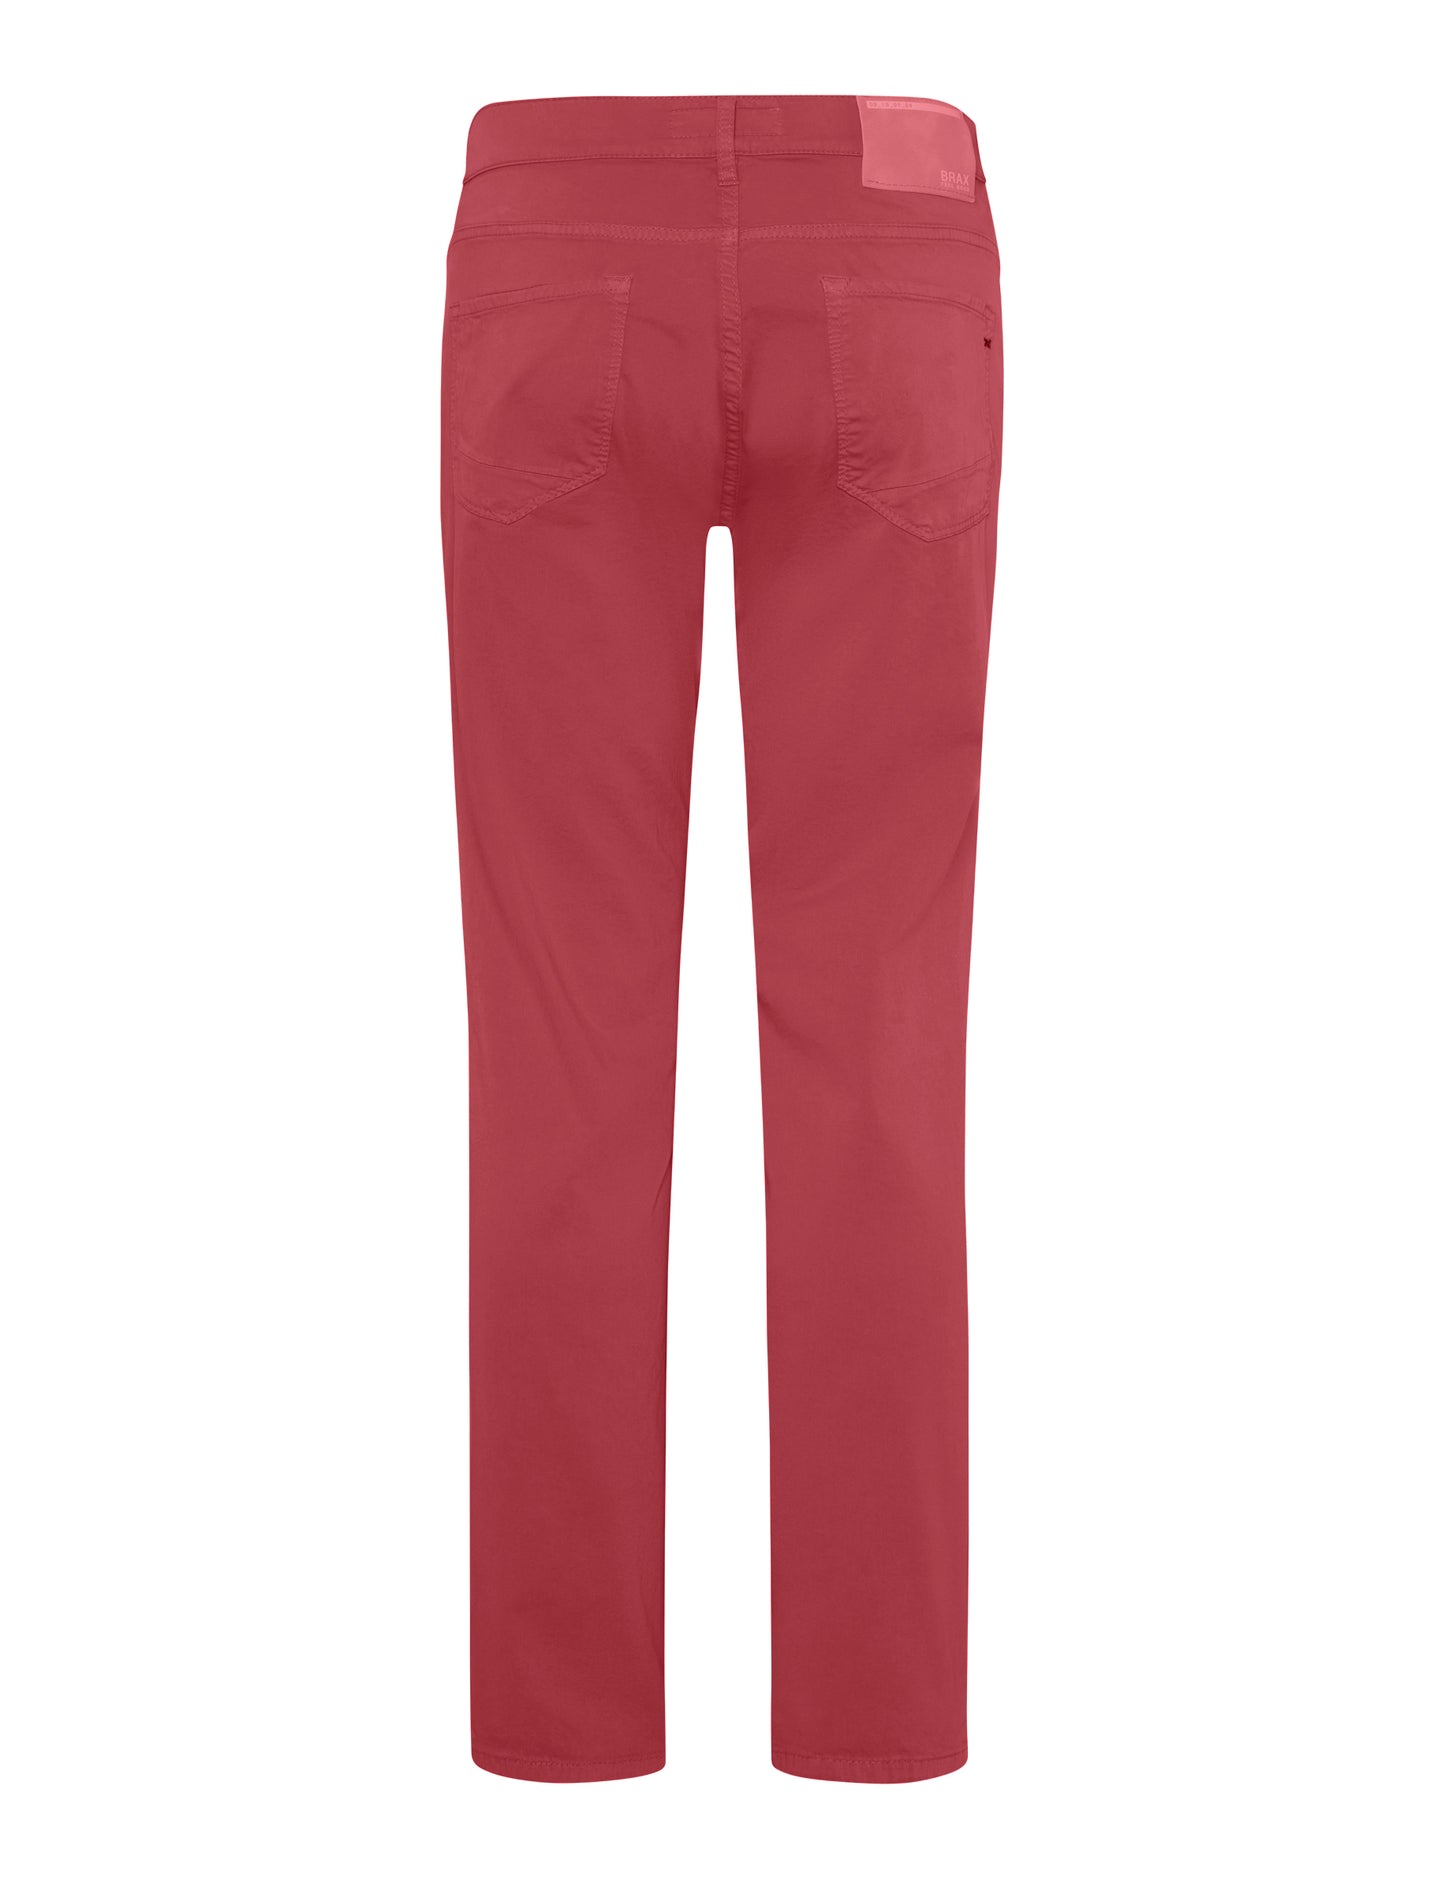 Chuck Hi Flex Pant in Indian Red